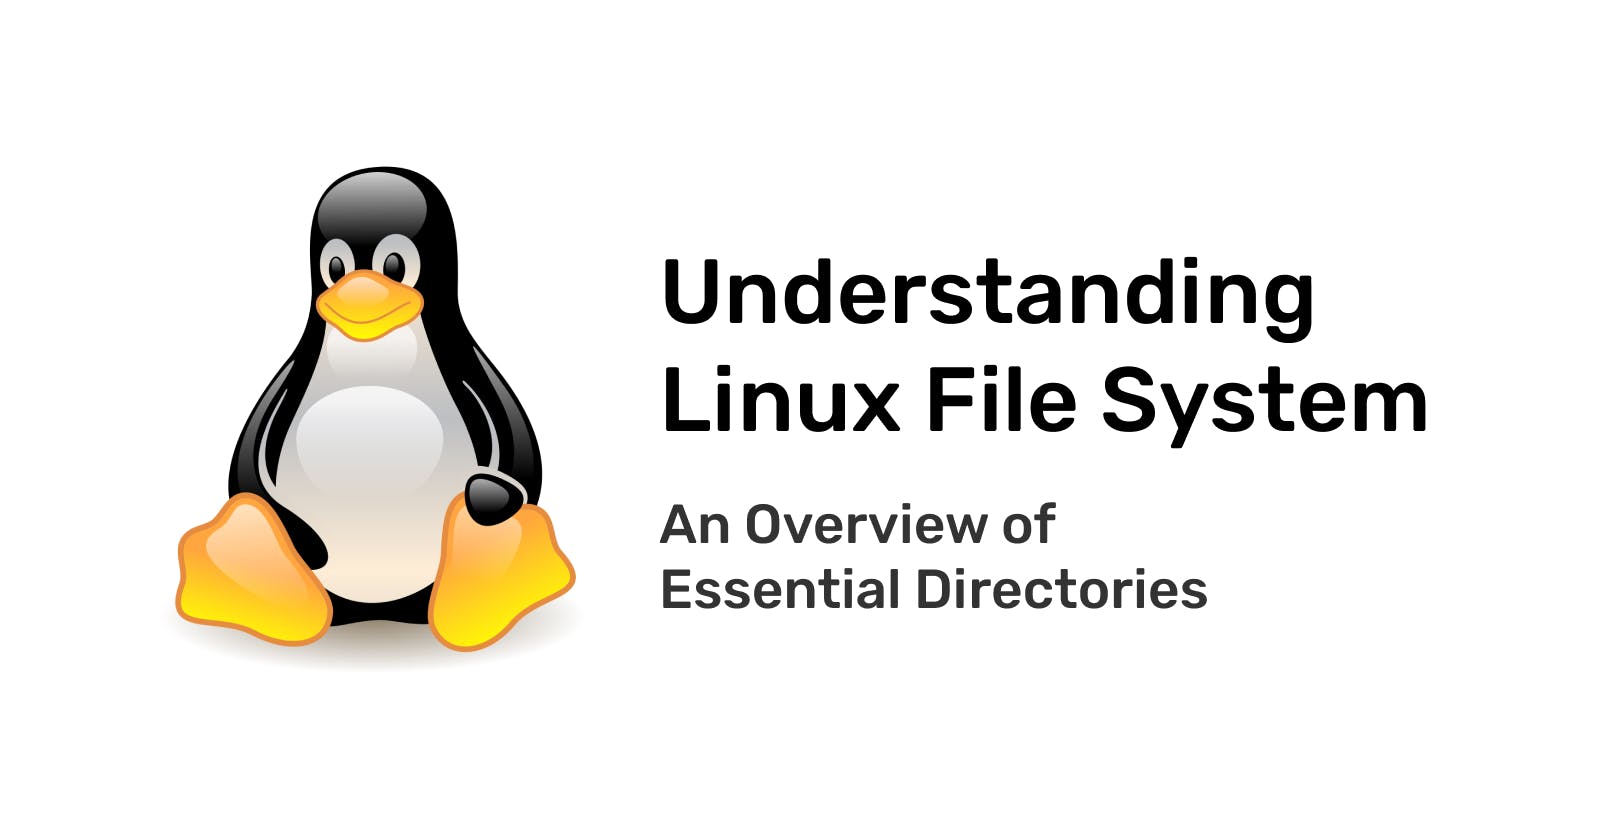 Understanding Linux File System: An Overview of Essential Directories